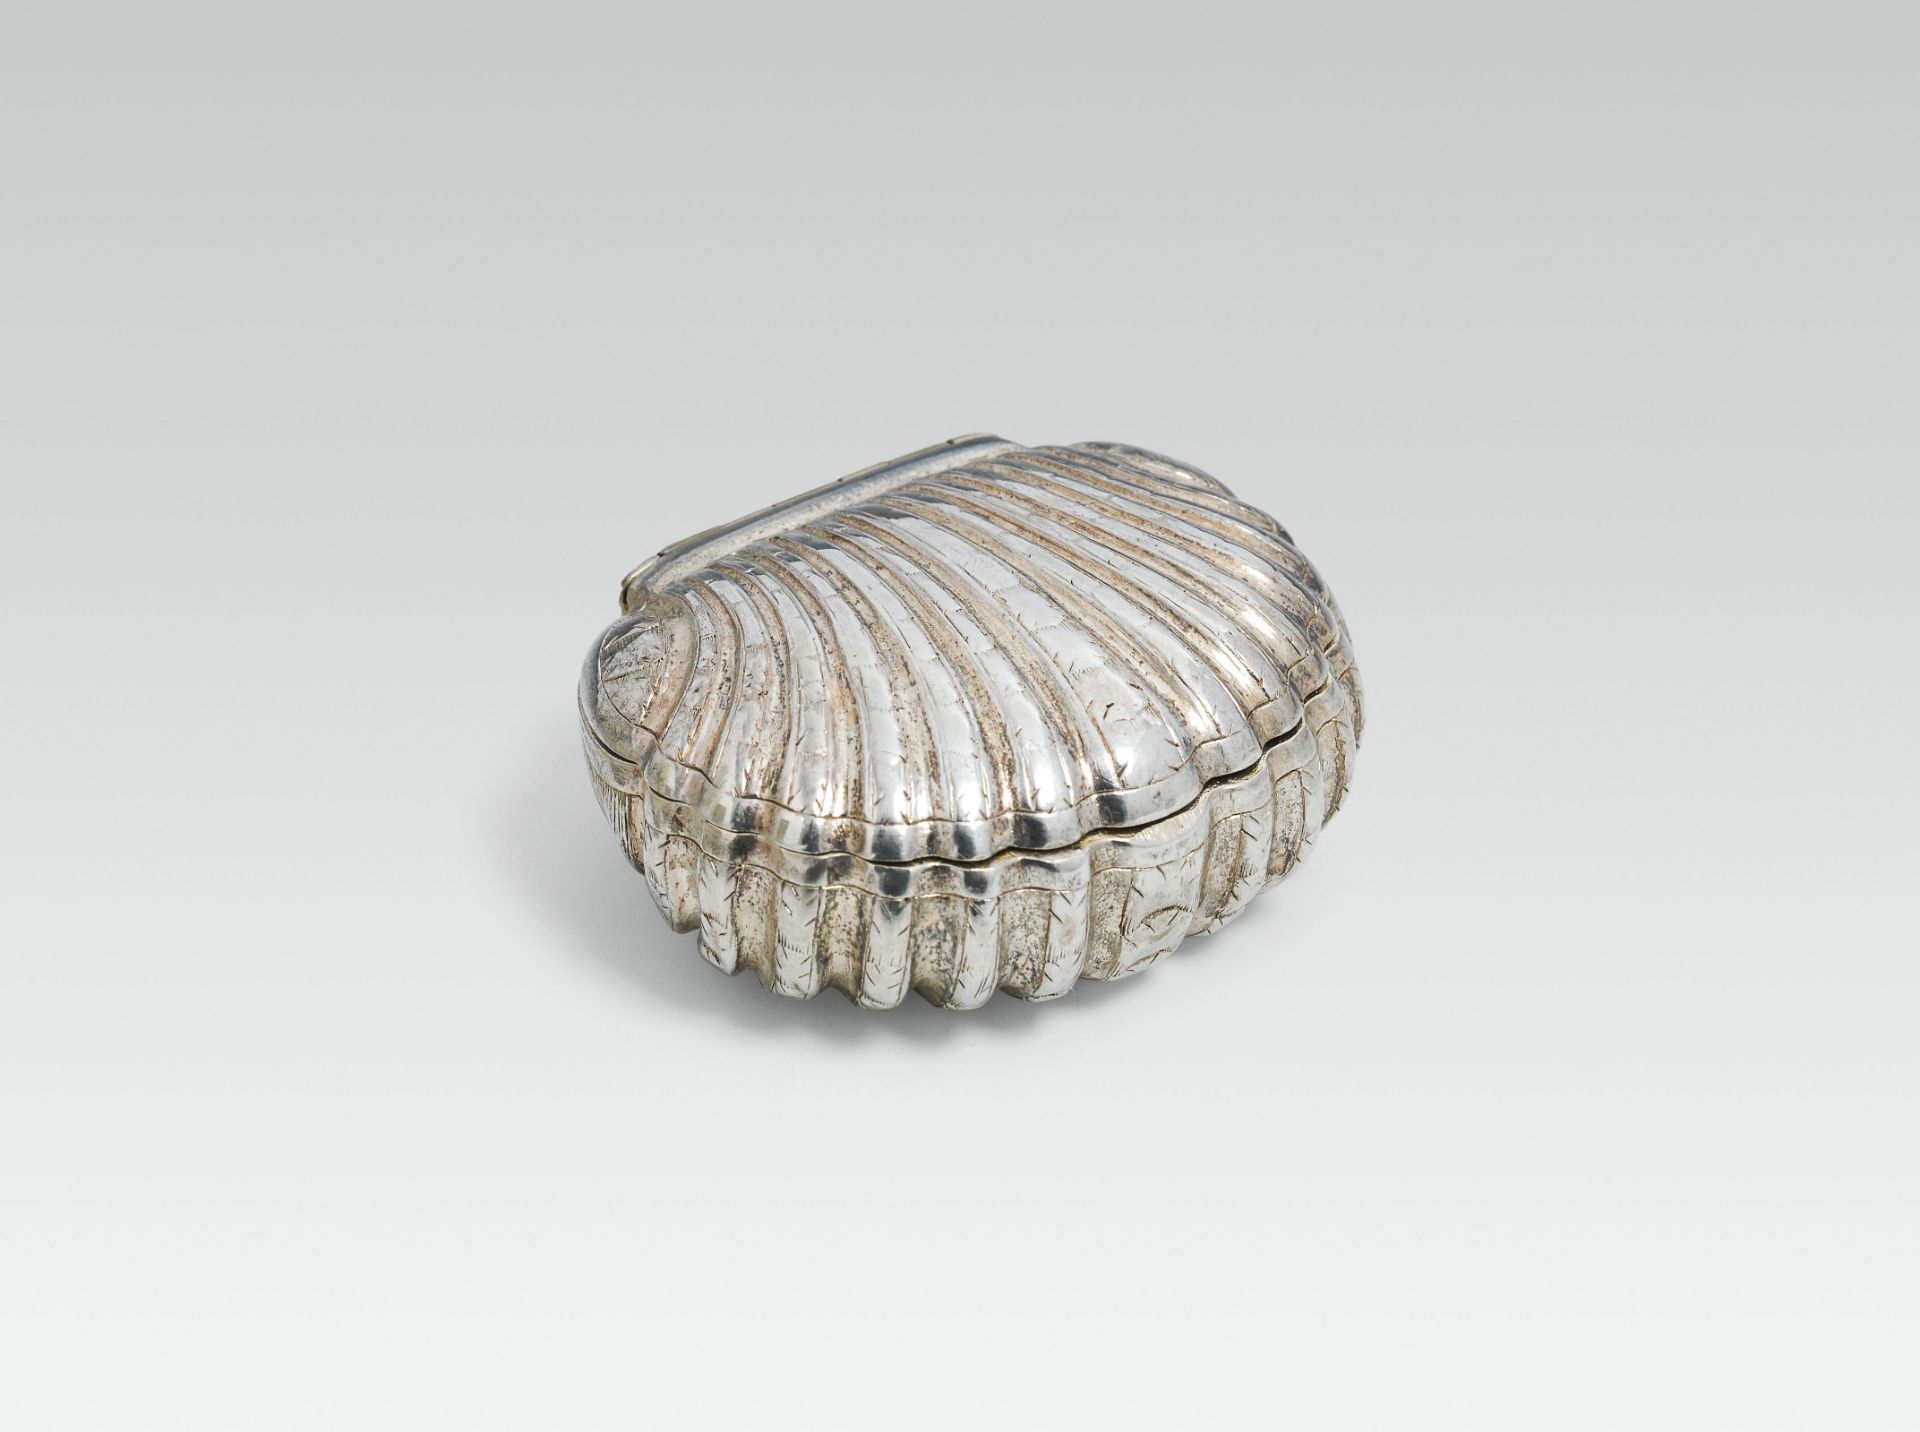 Shell boxsilver, gilded inside; marked on the inside: Augsburg hallmark and maker's mark "SCH"l. 5.2